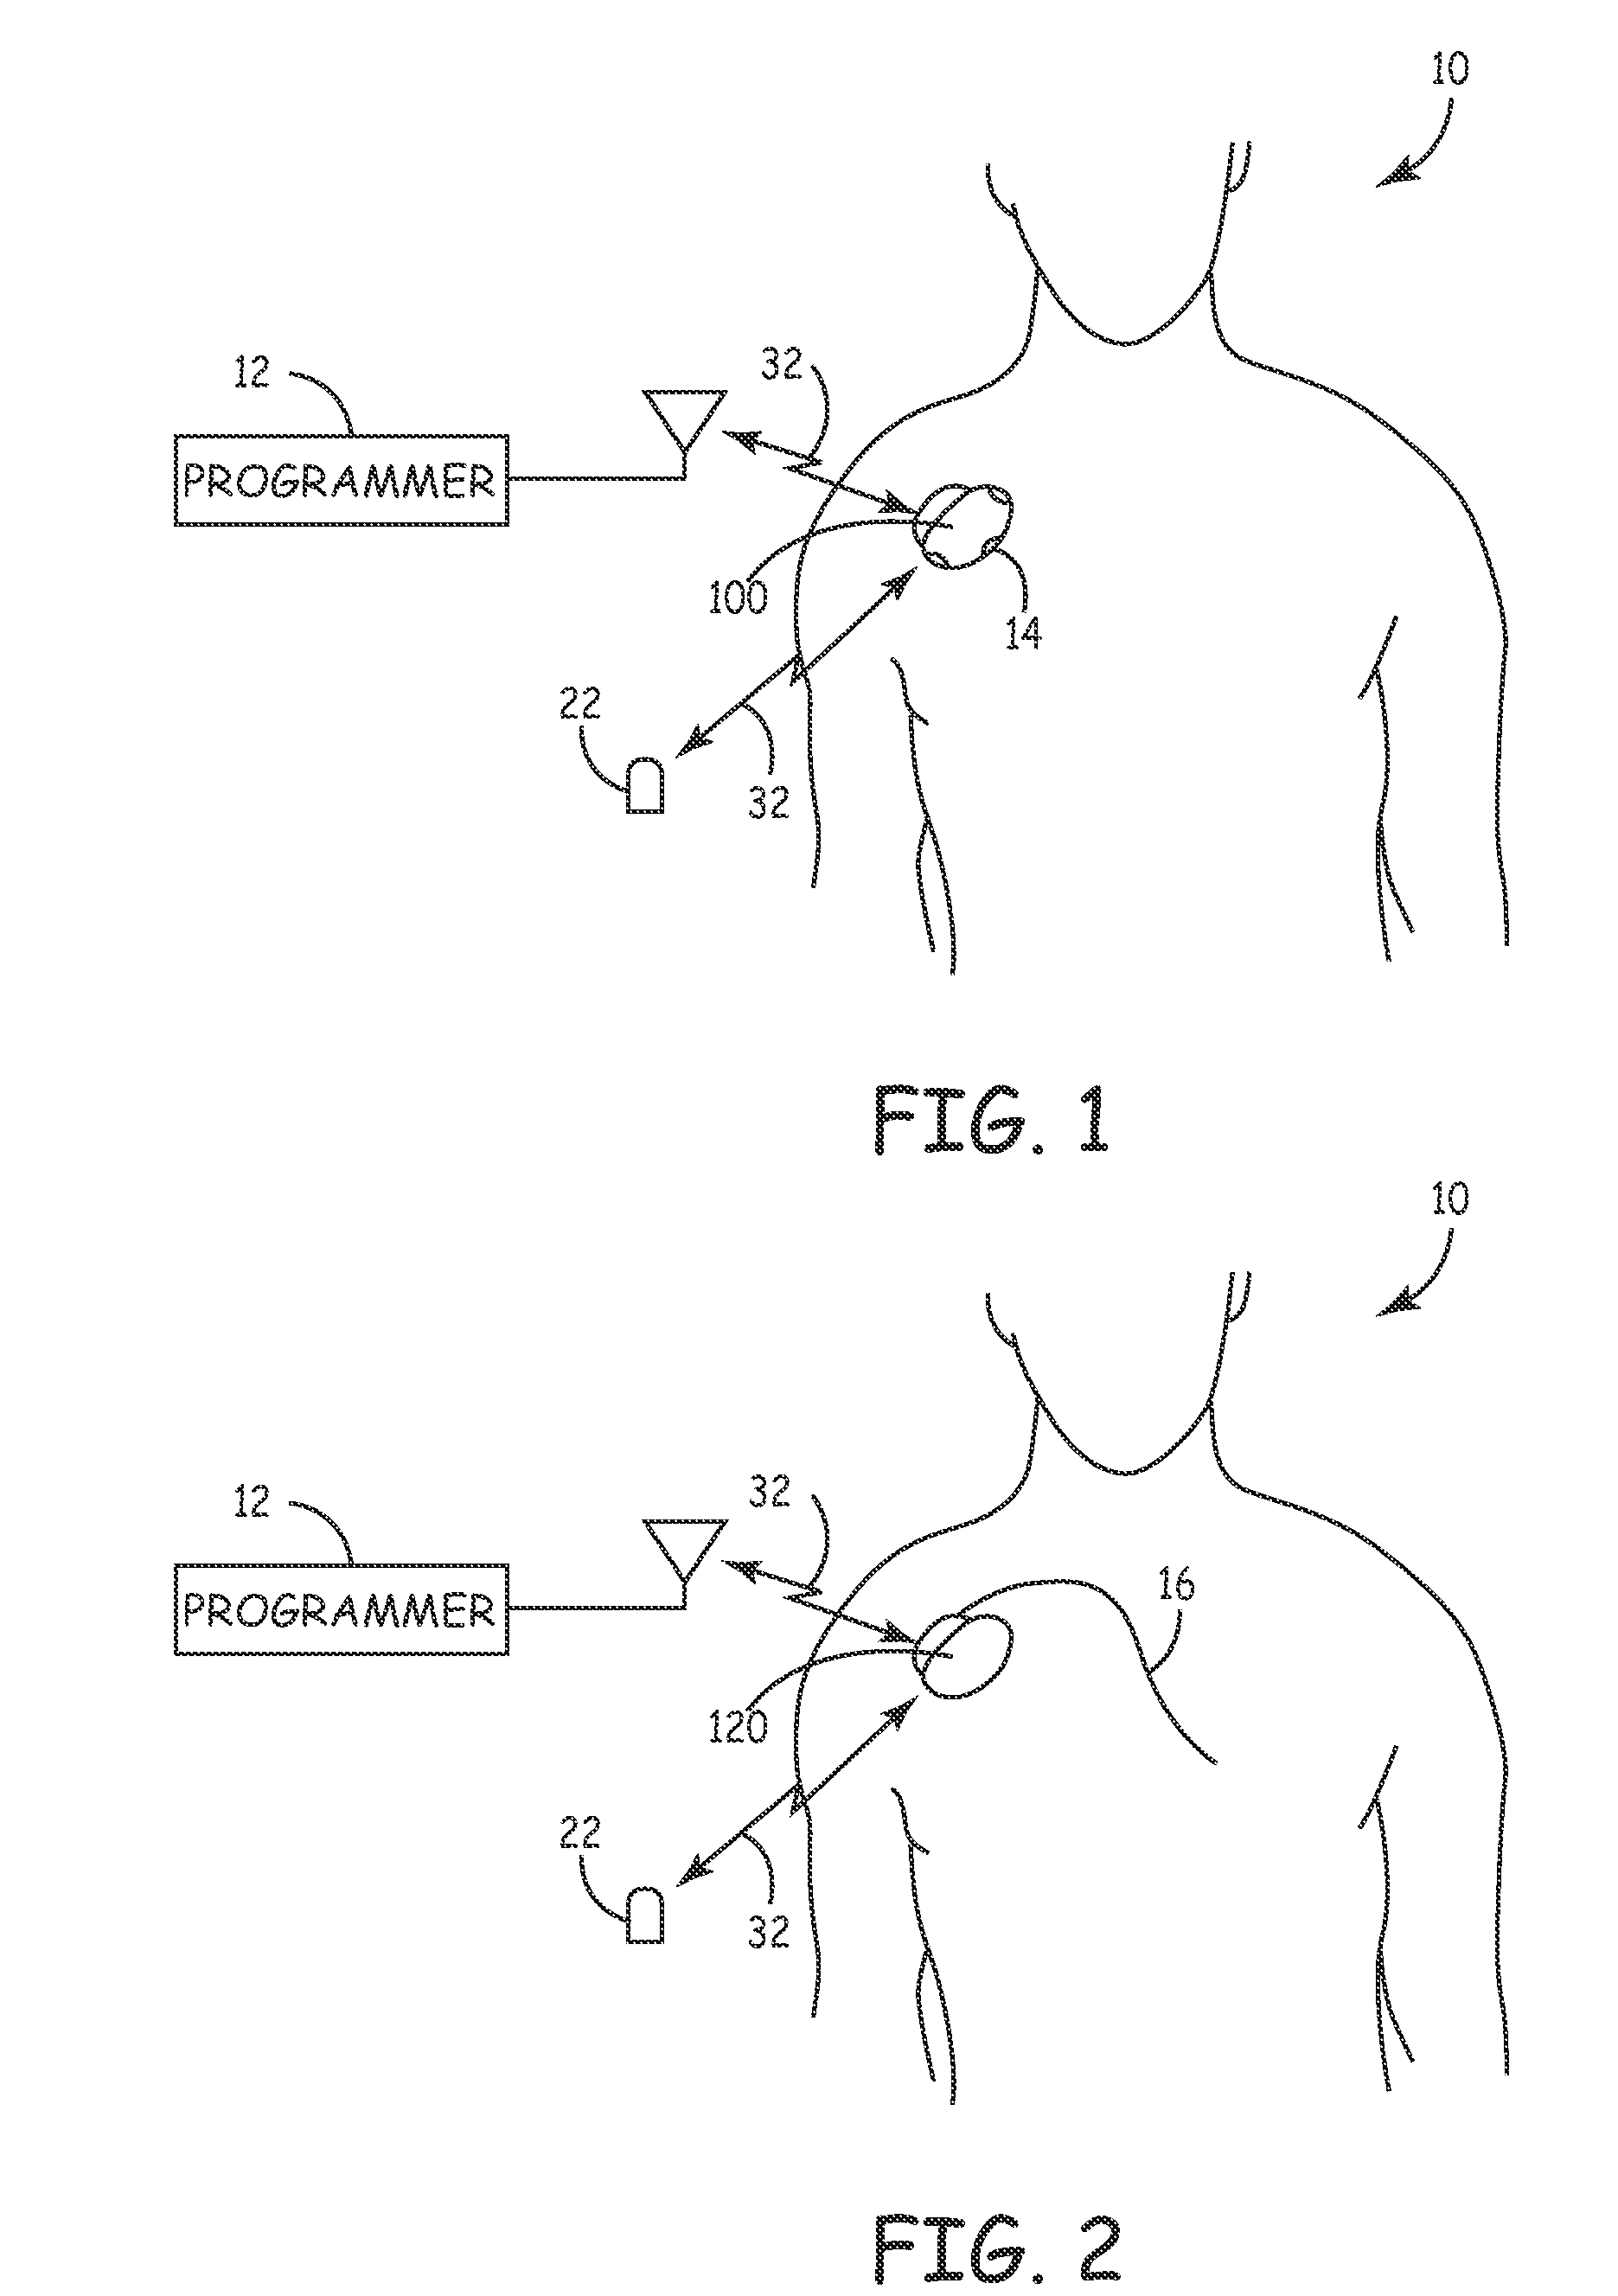 System and method for monitoring cardiac signal activity in patients with nervous system disorders